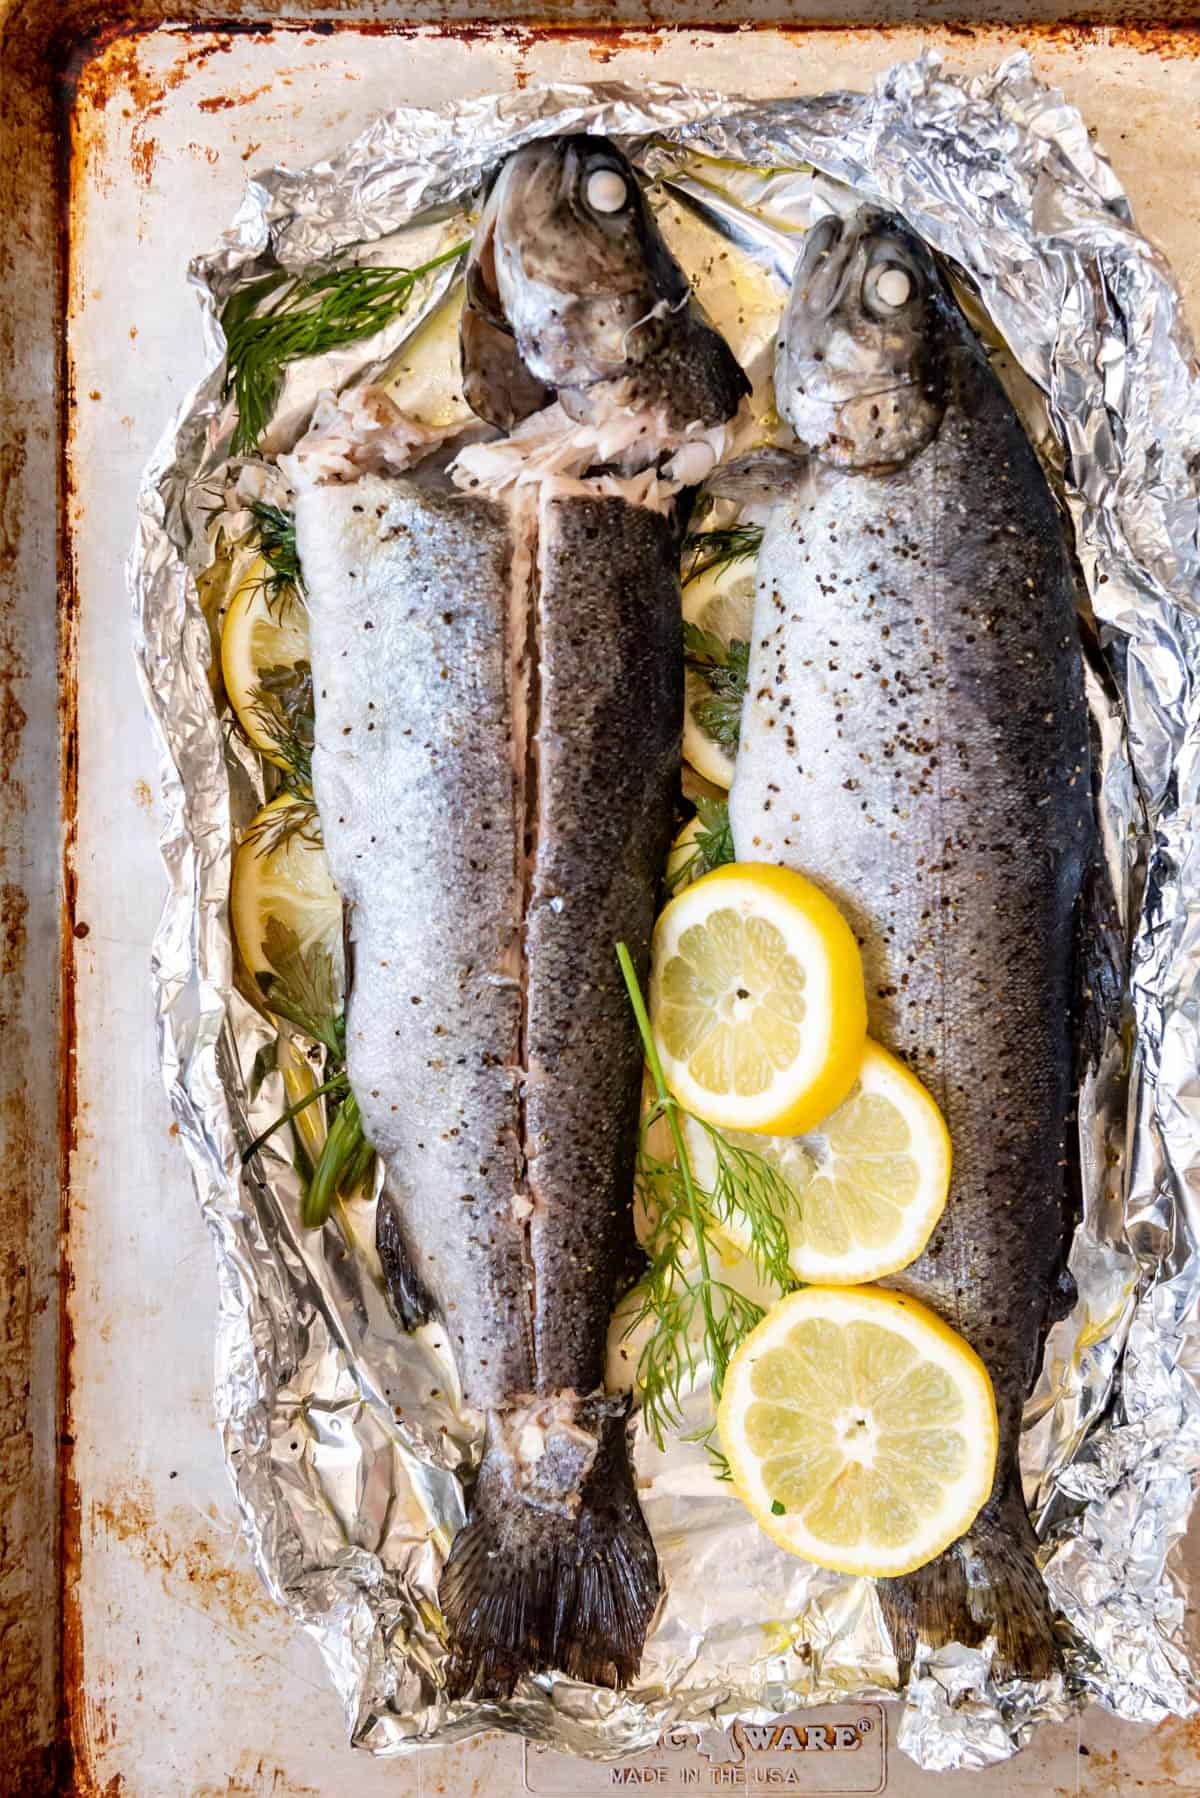 An image of whole baked rainbow trout sliced down the side to remove fillets of fish without the bones.